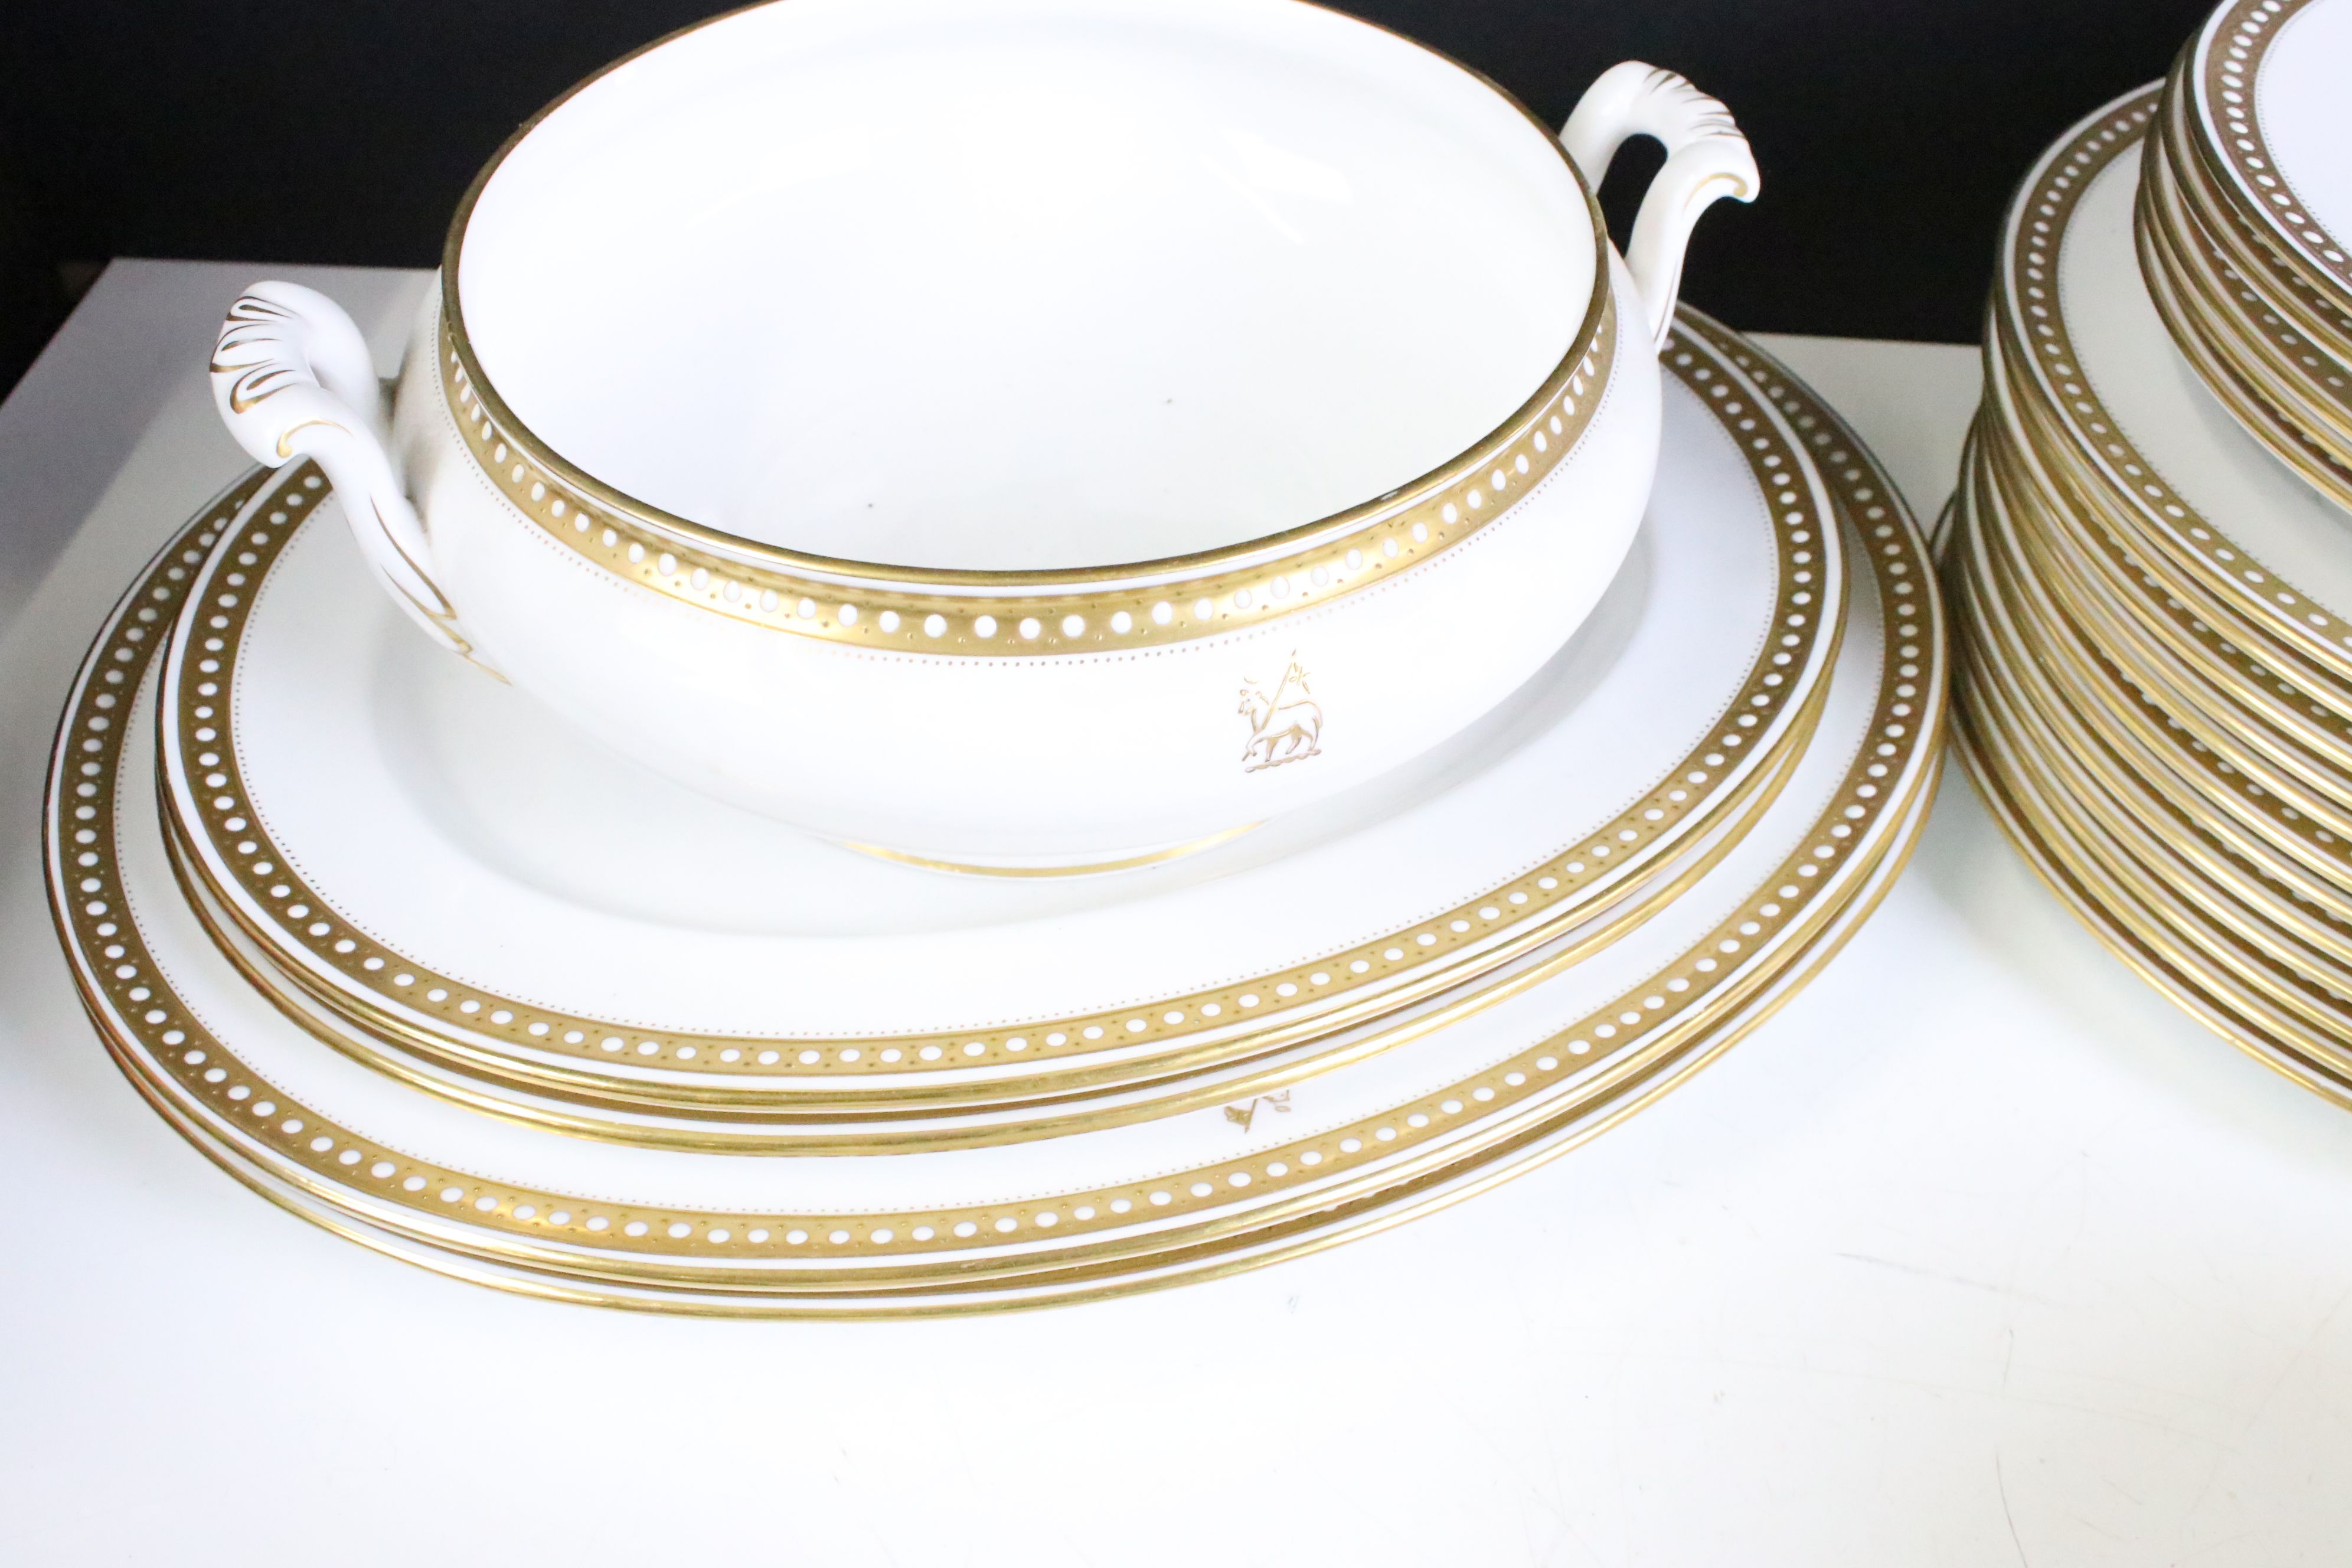 Early 20th Spode dinner service retailed by Thomas Goode & Co Ltd having a white ground with gilt - Image 4 of 6